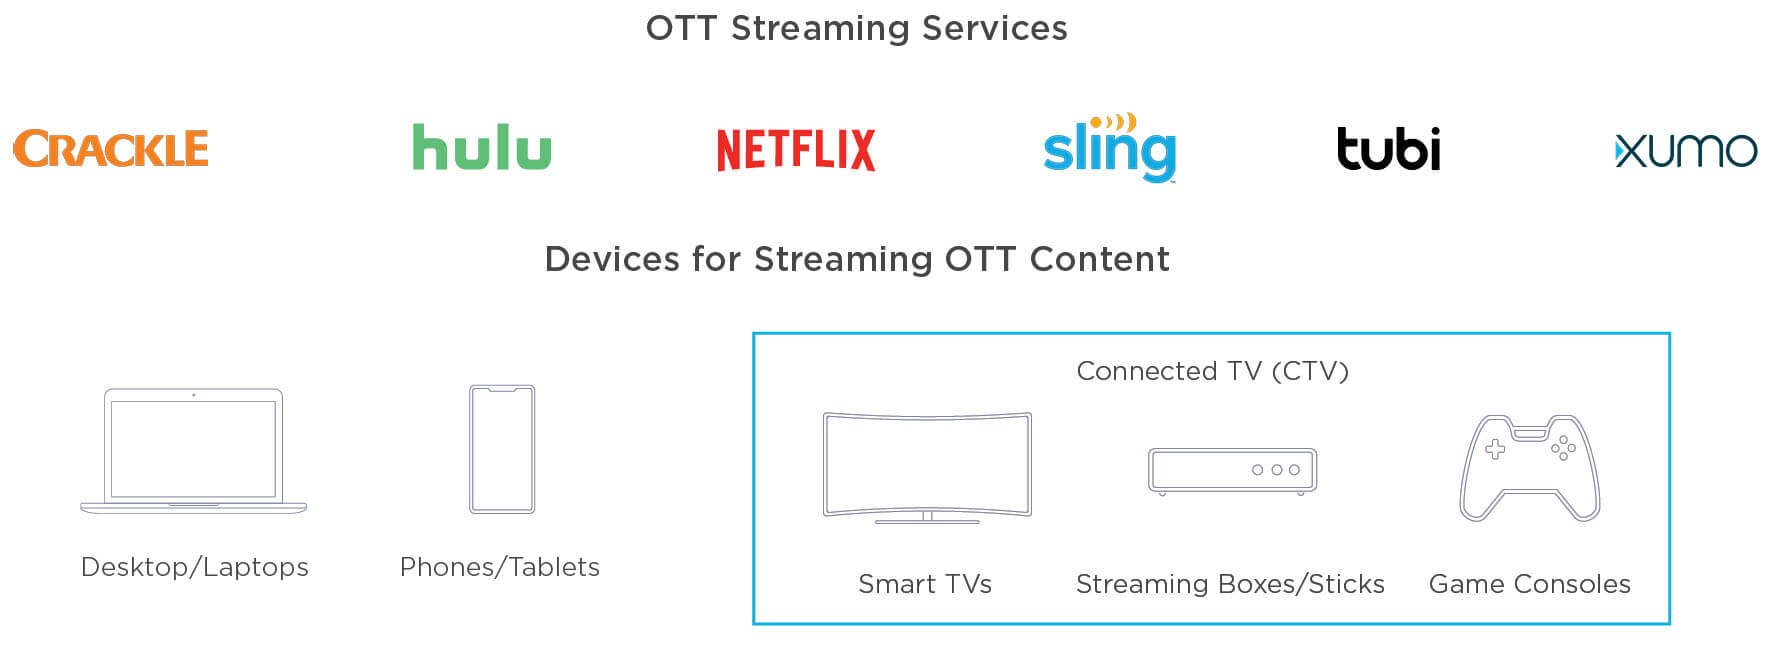 OTT Streaming services and devices